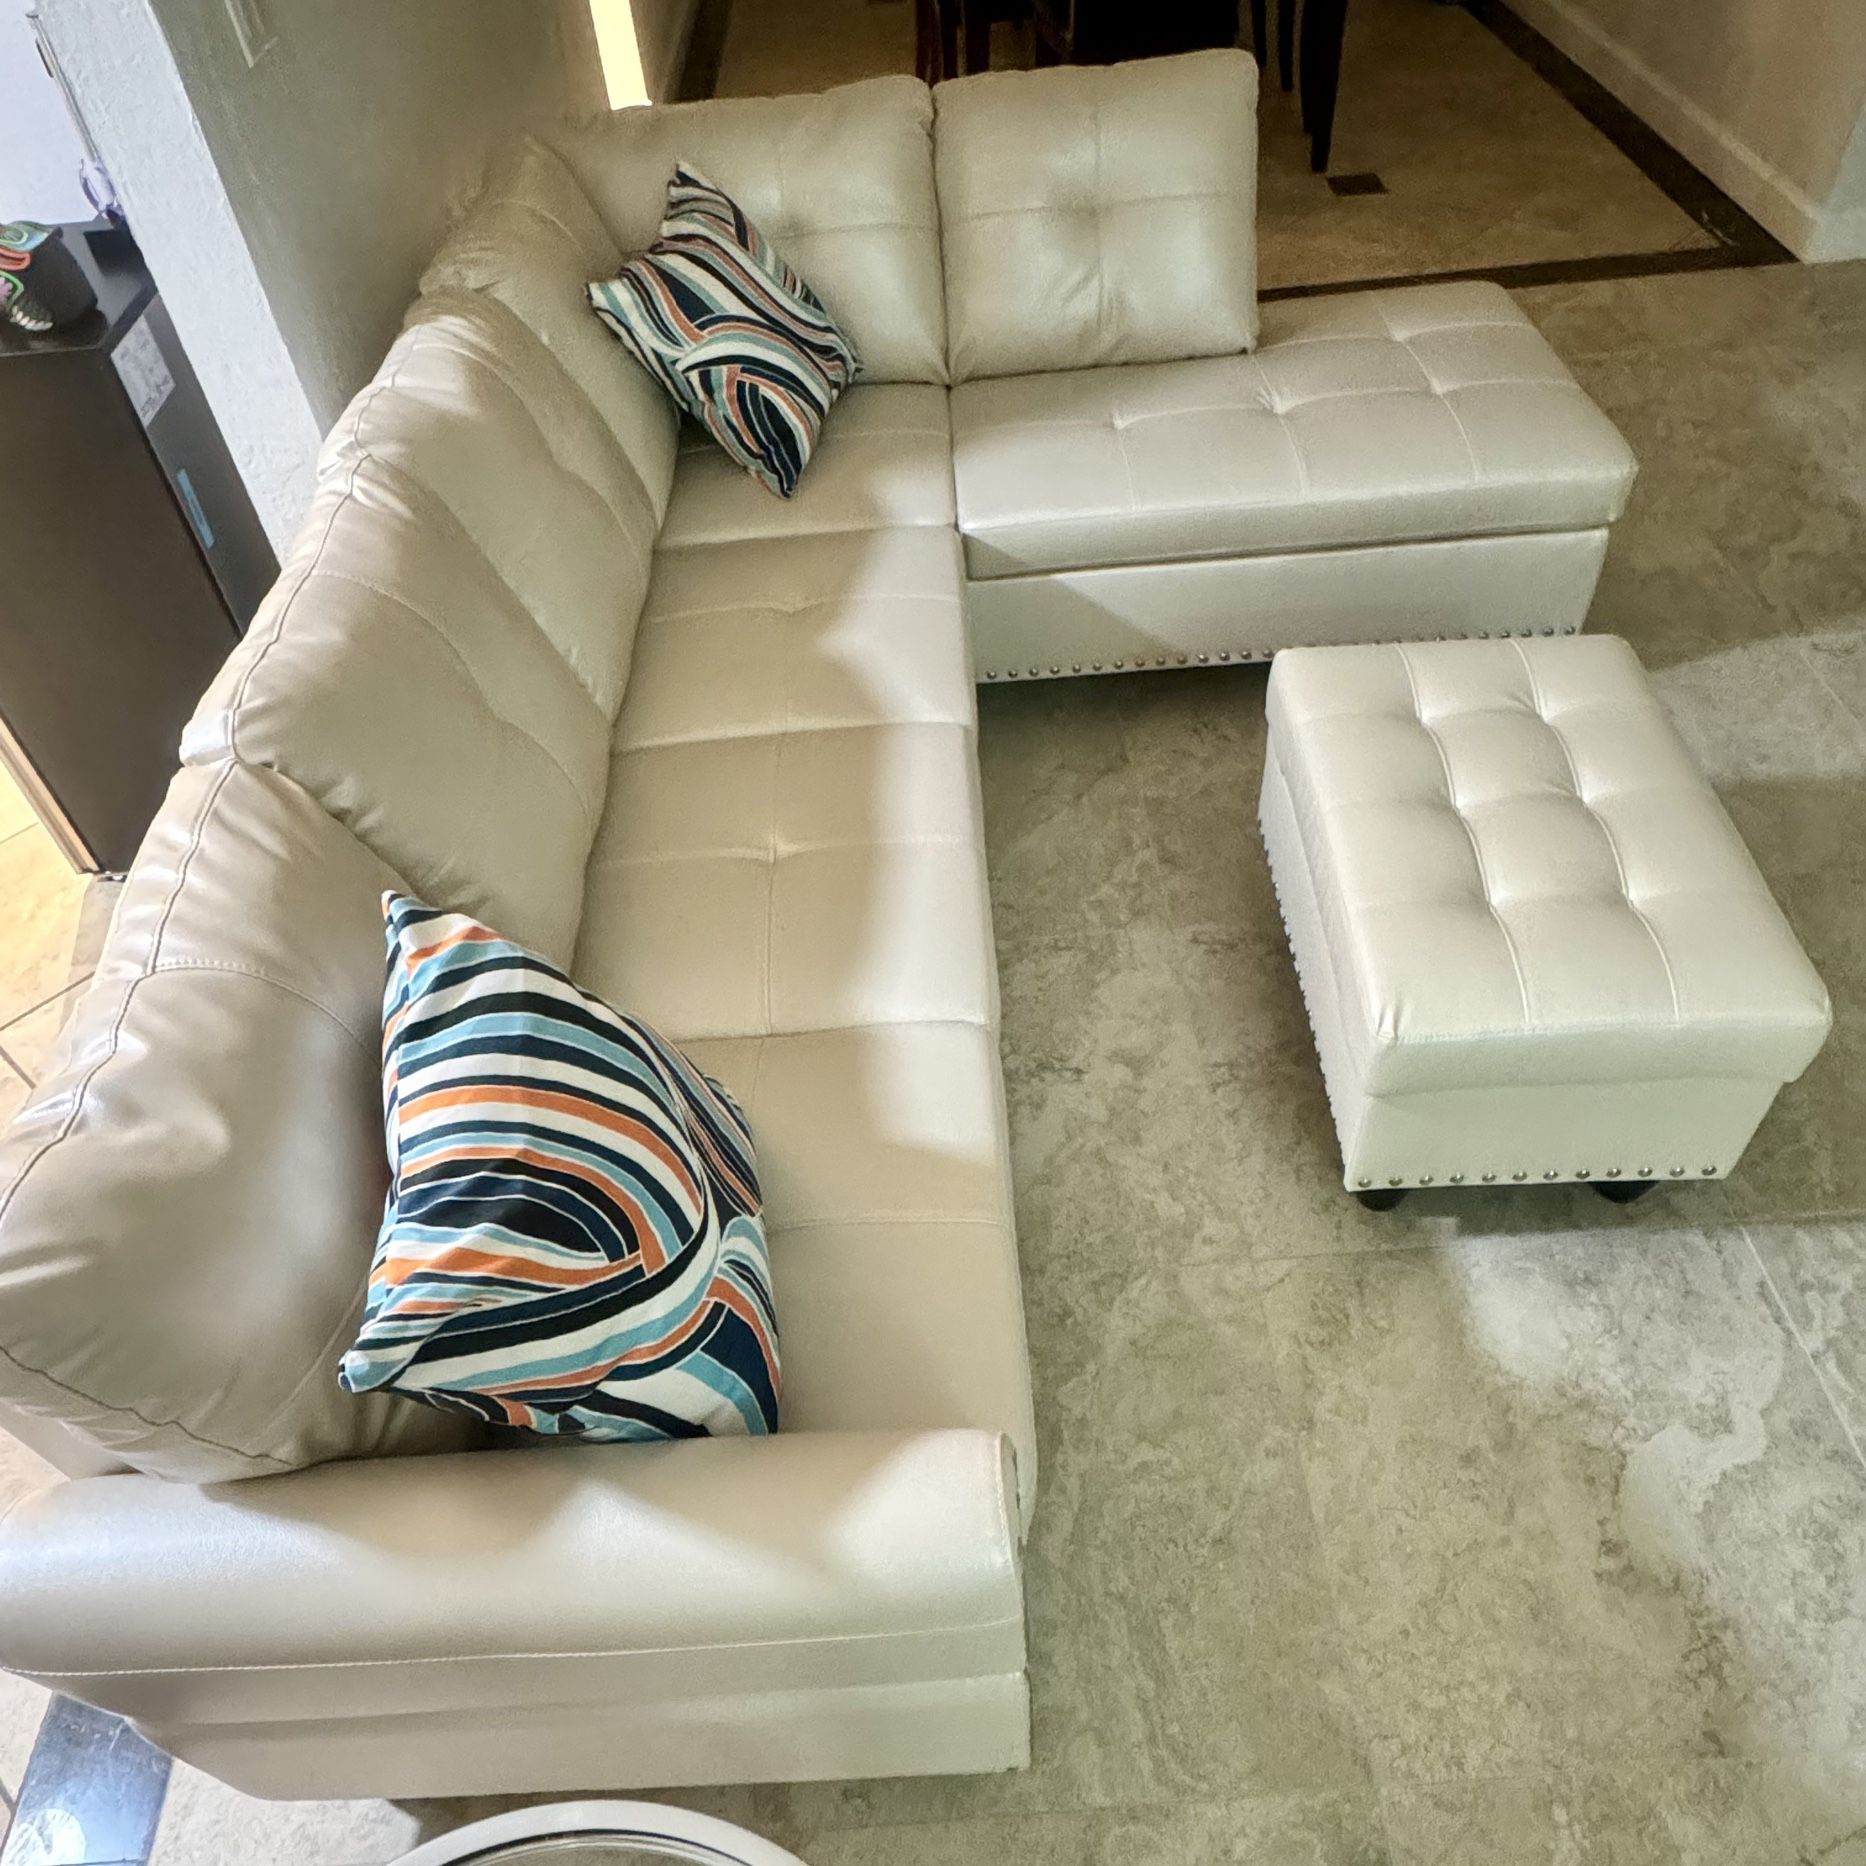 New sectional couch with ottoman 